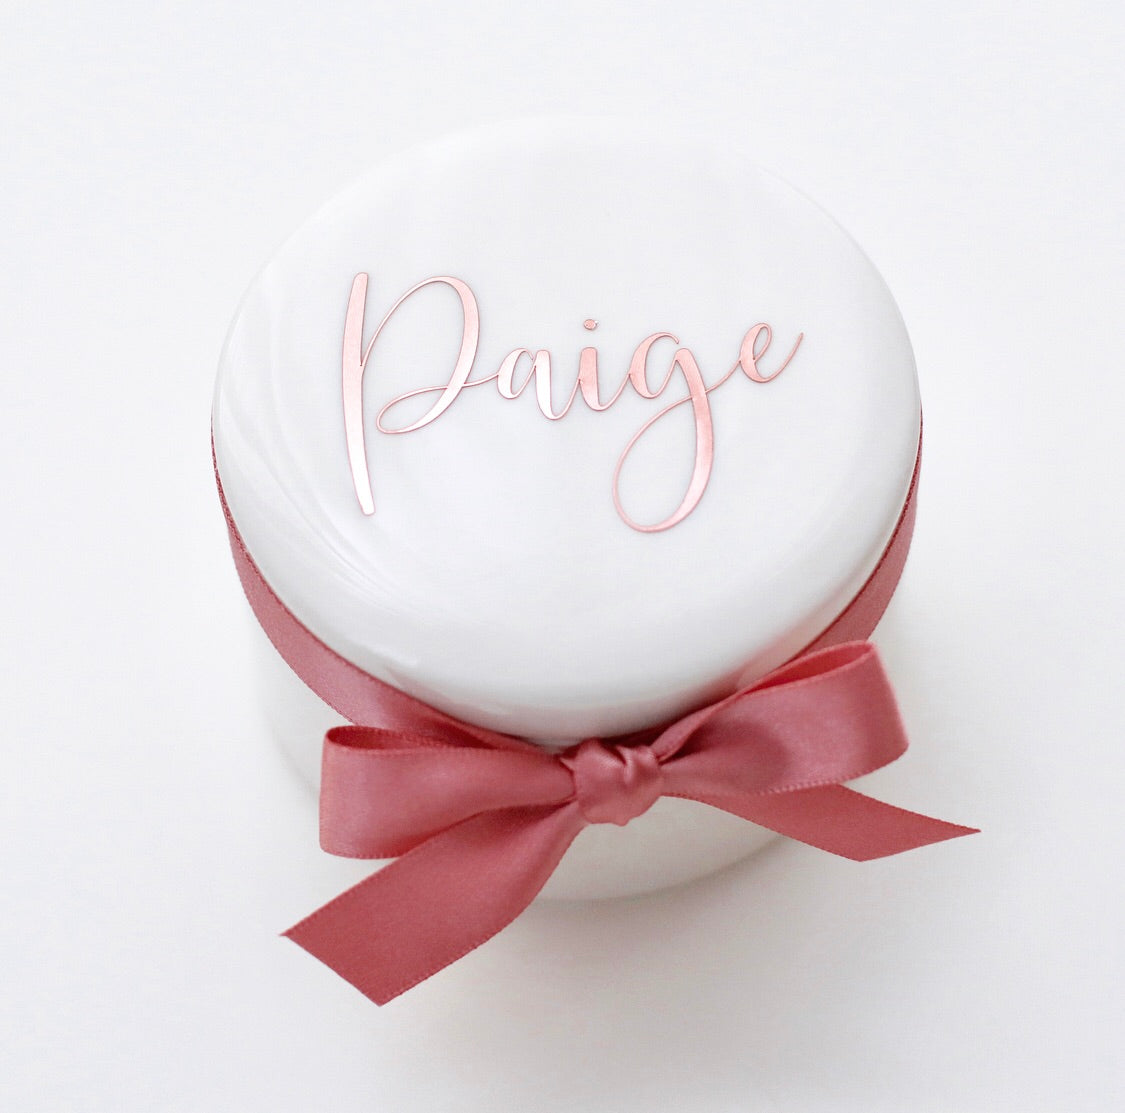 Ceramic white trinket box to keep all your special little things, personalised with text on the lid.